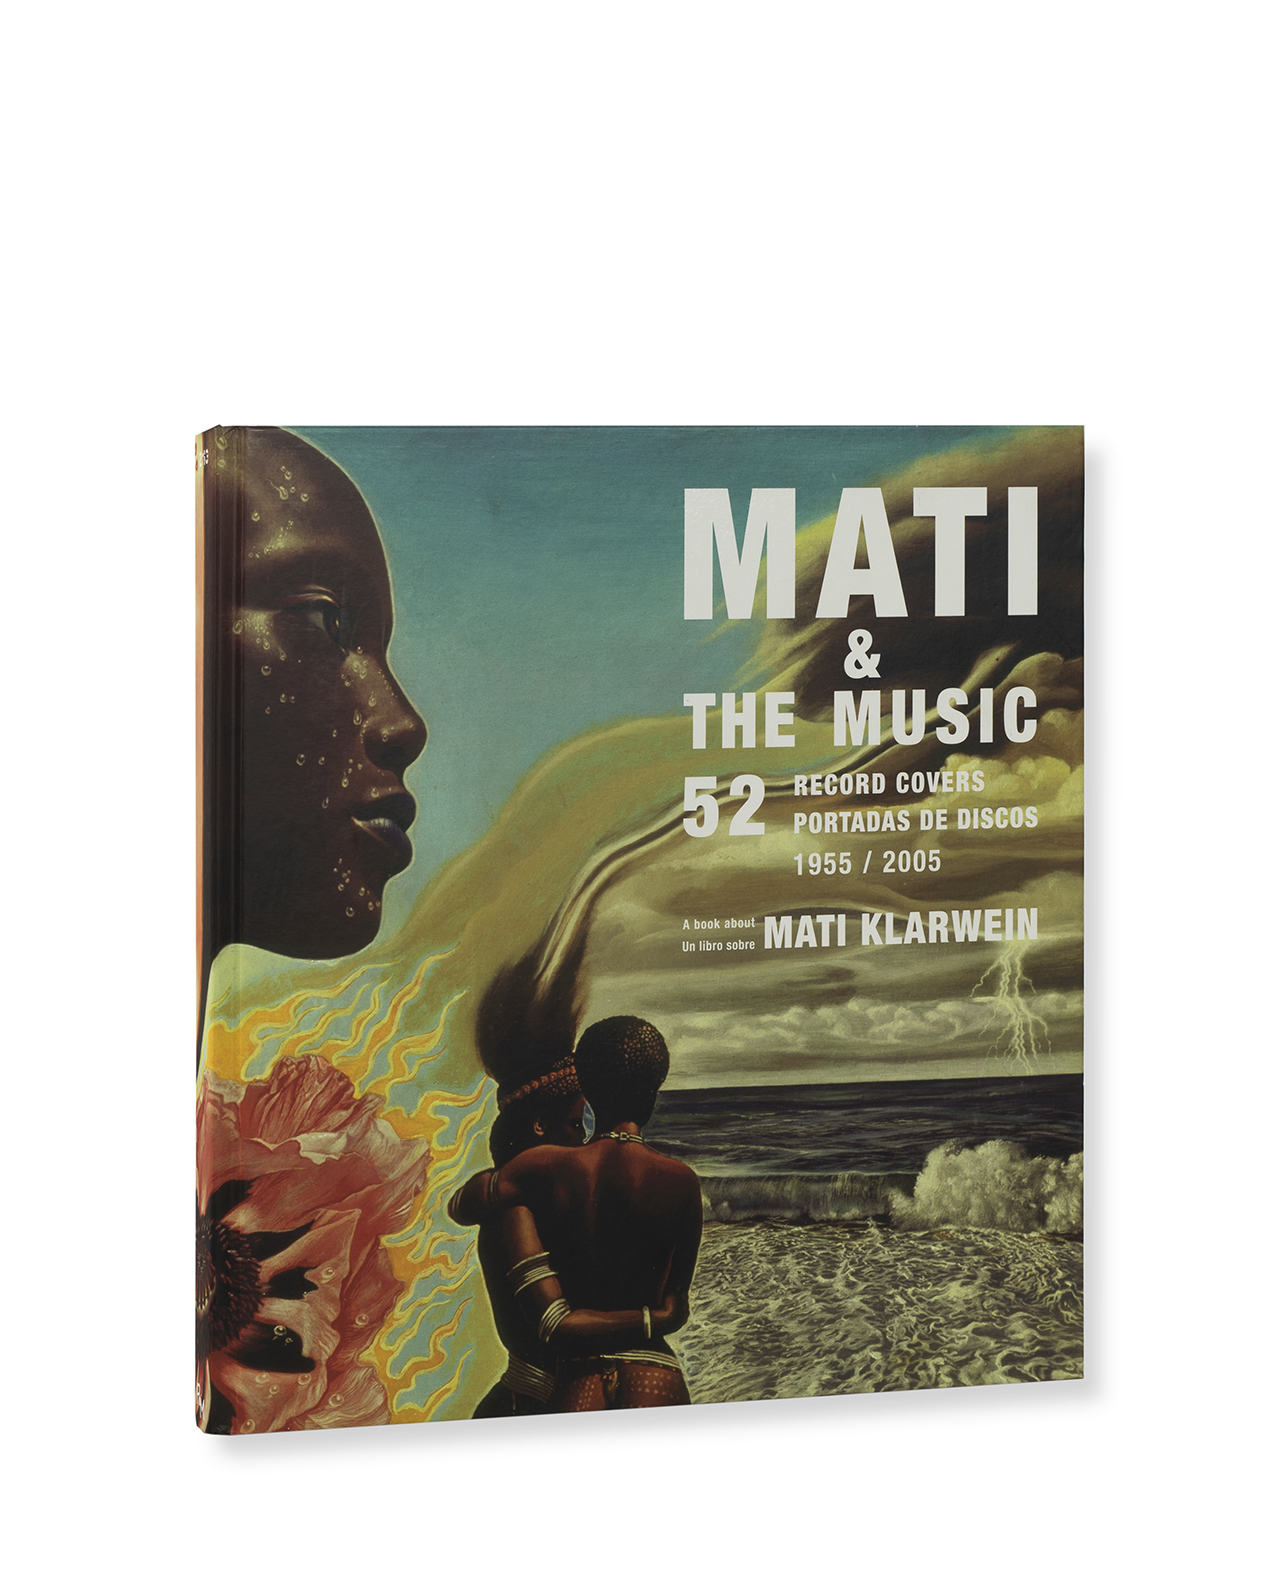 Mati & the Music. 52 Record Covers 1955-2005 - Editorial RM